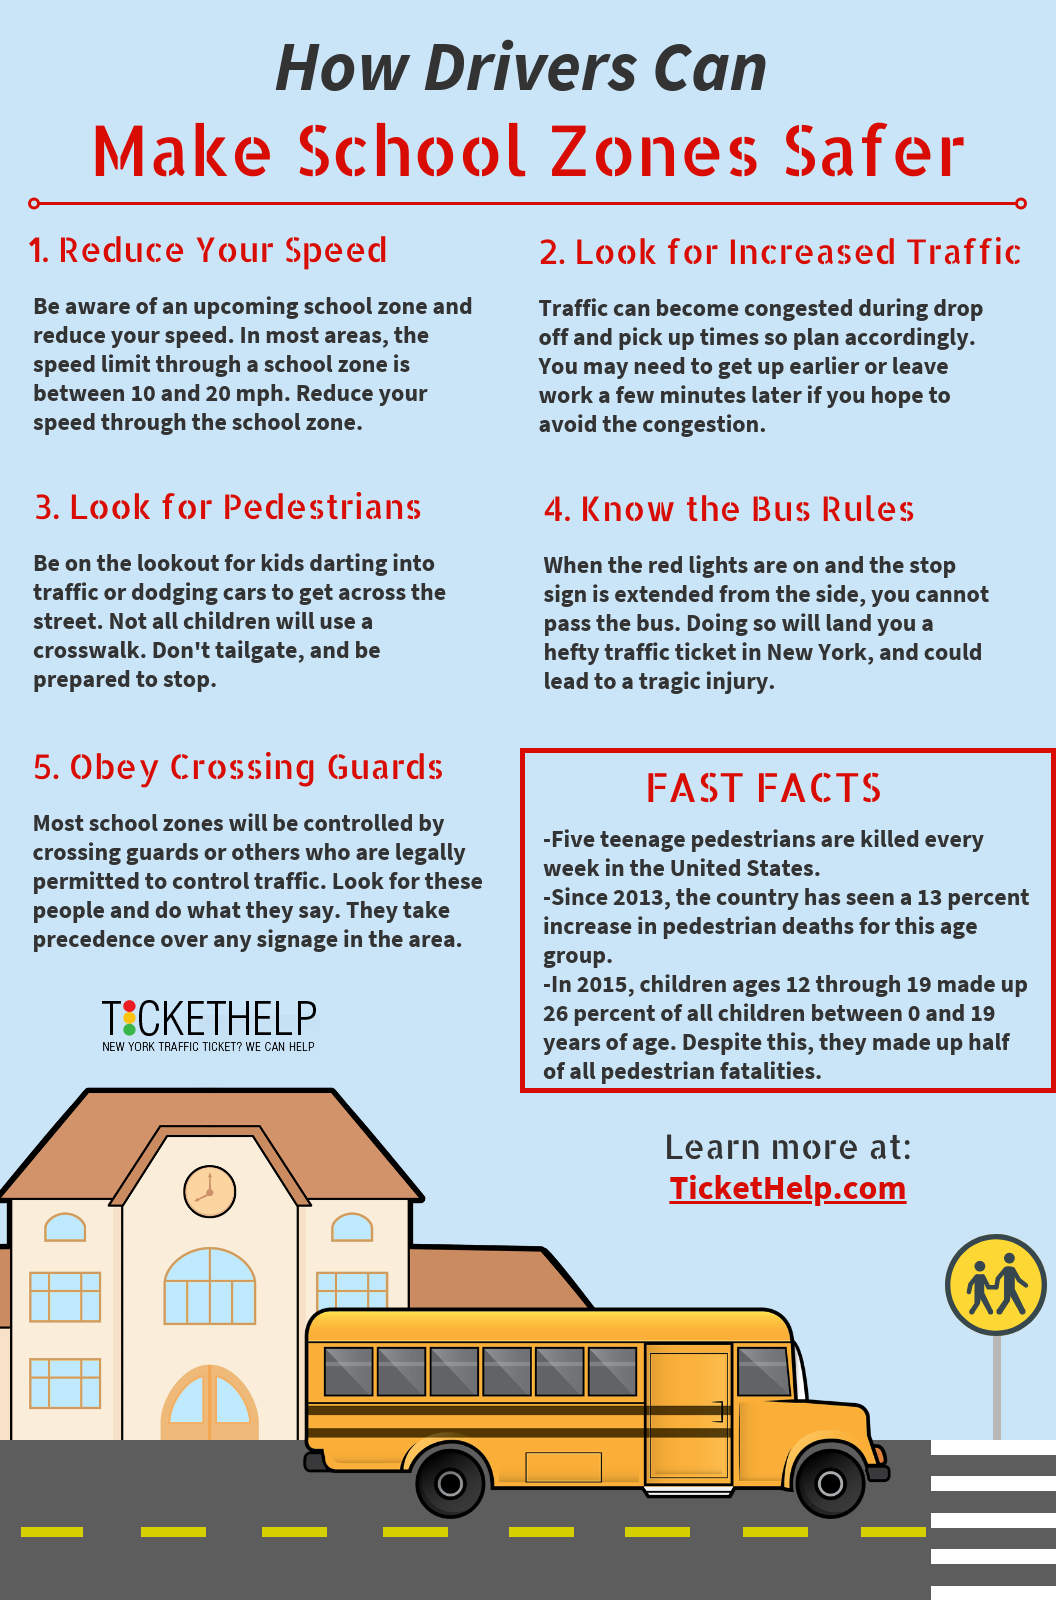 How Drivers Can Make School Zones Safer infographic